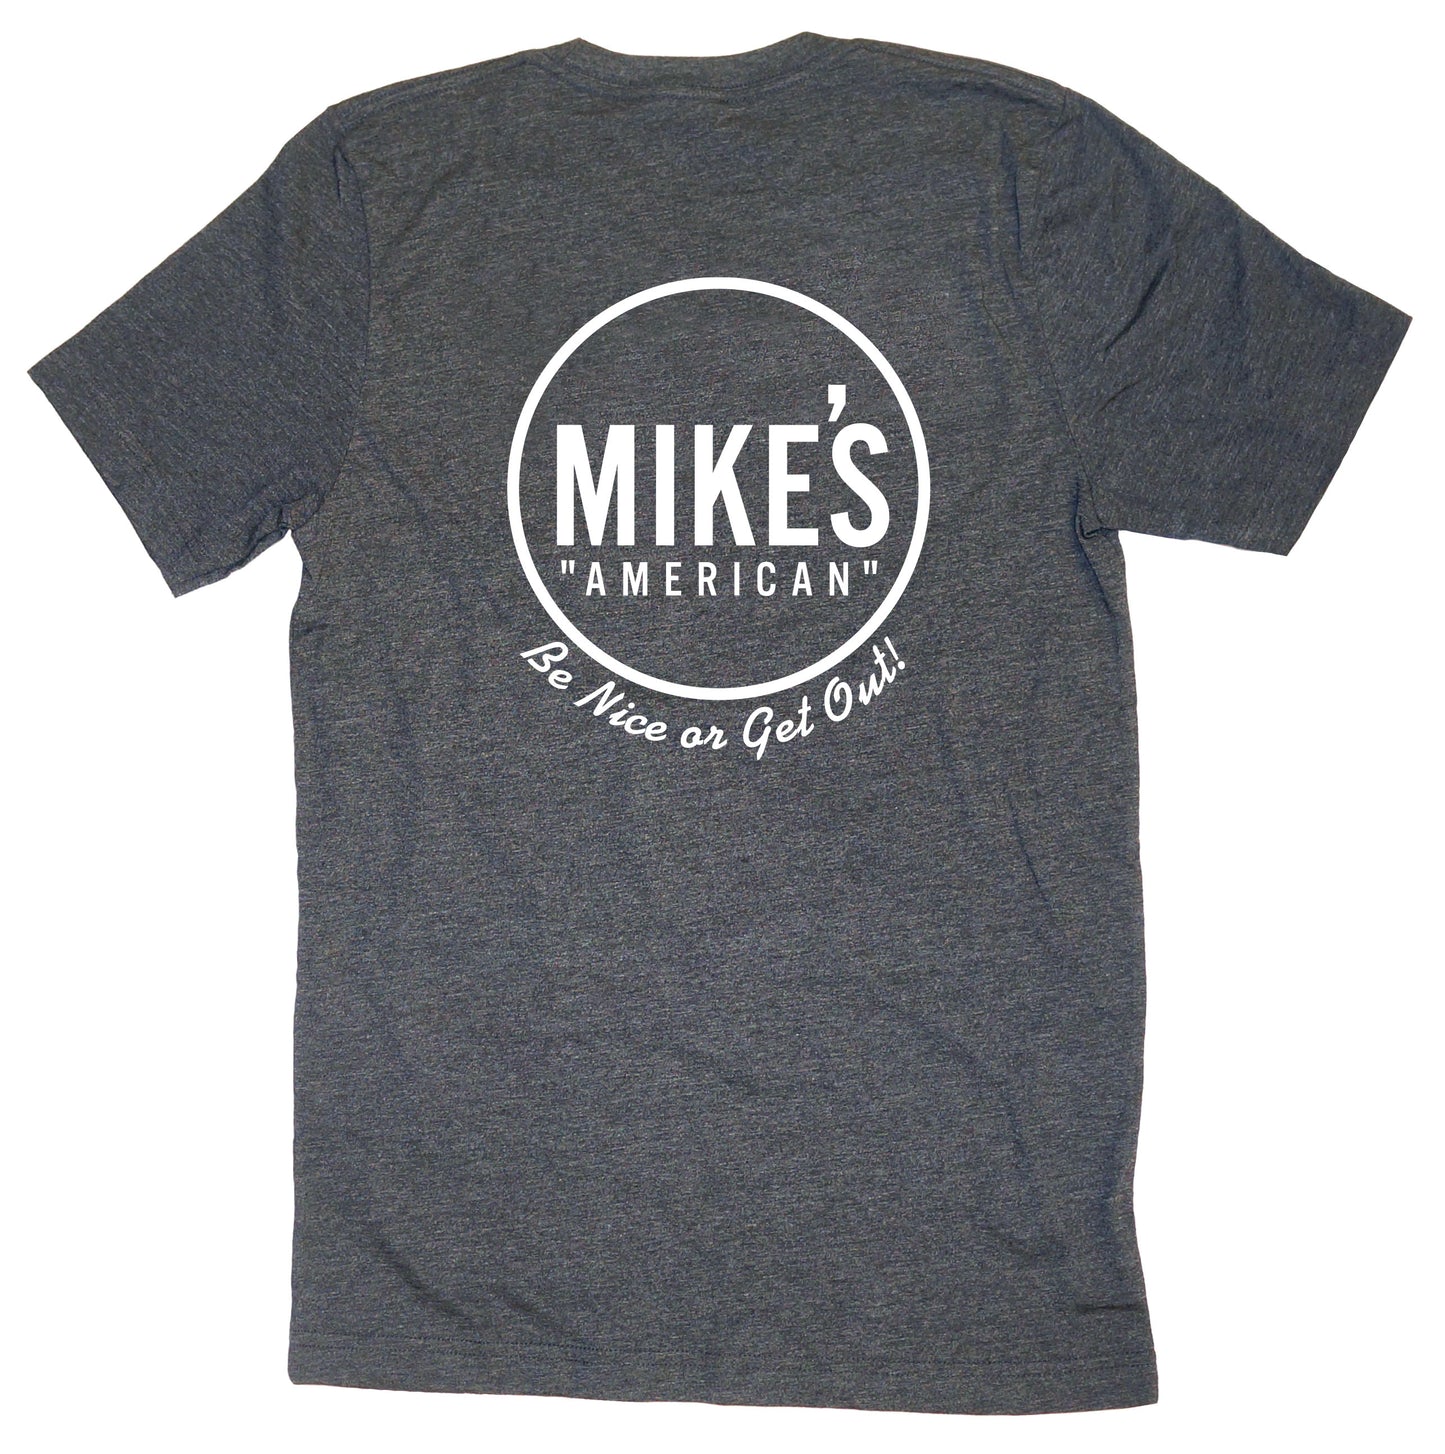 Mike's American T-Shirt